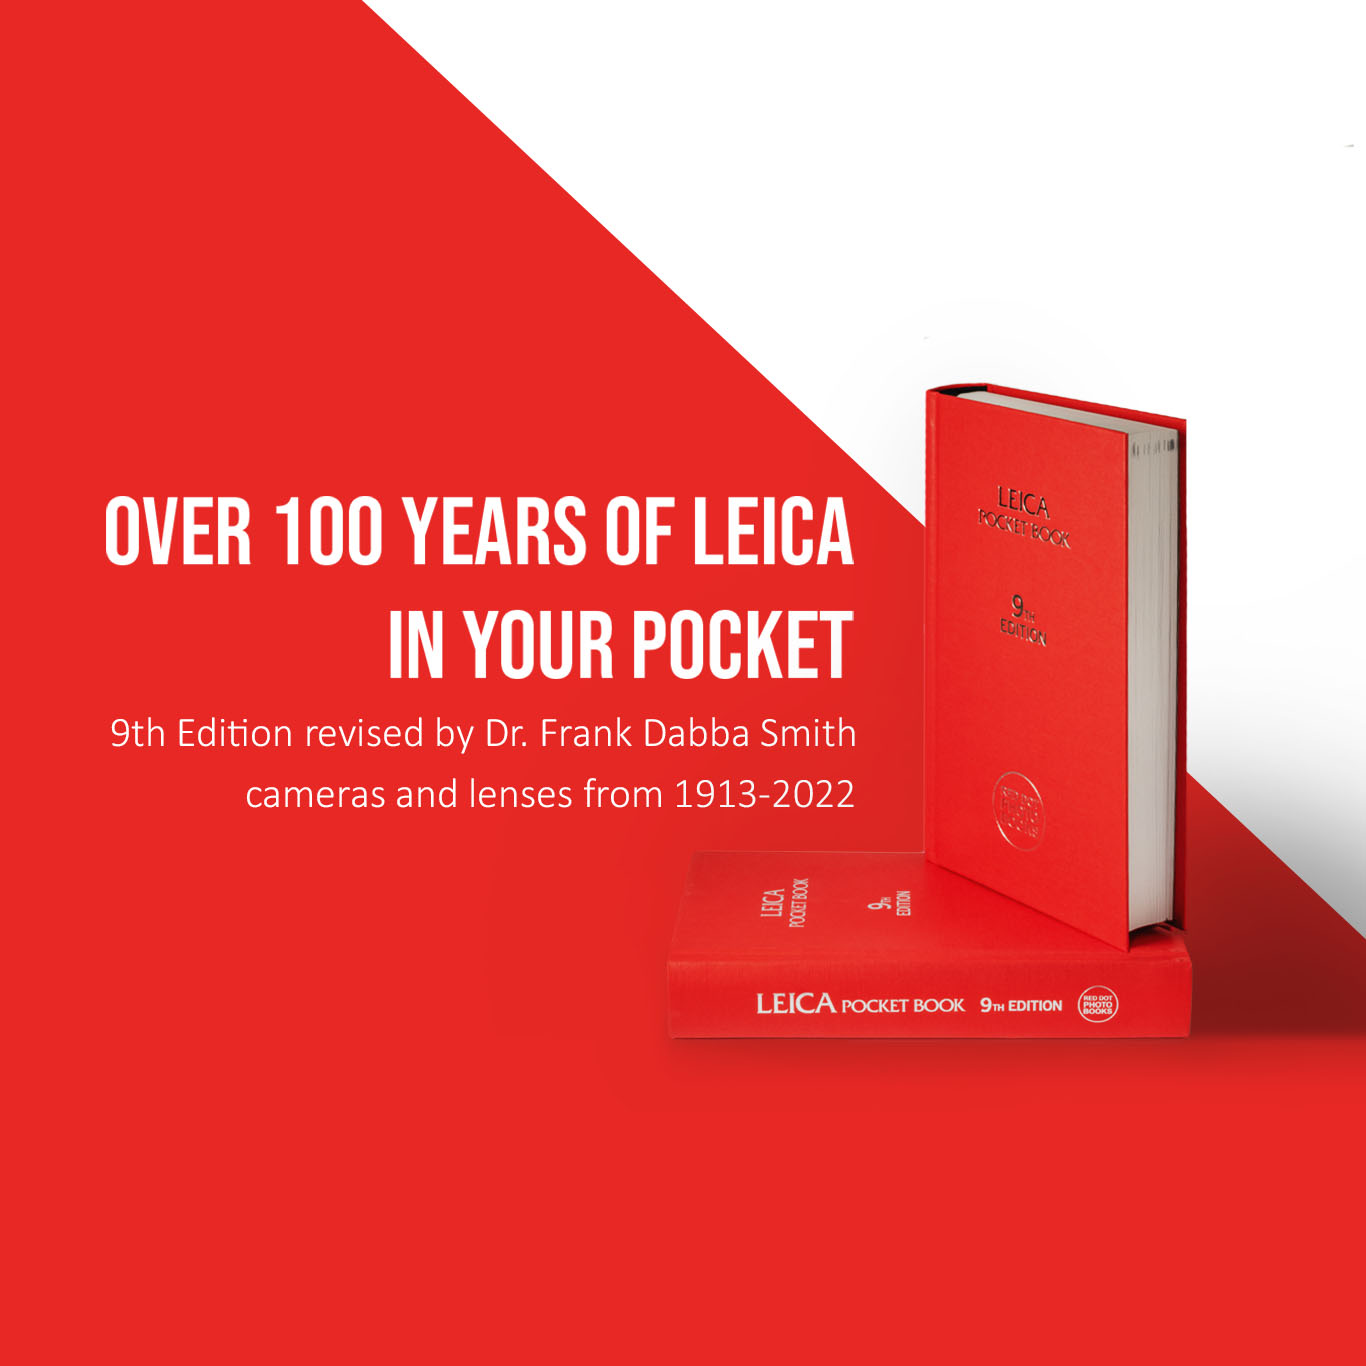 New Leica Pocket Book 9th edition now available - Leica Rumors